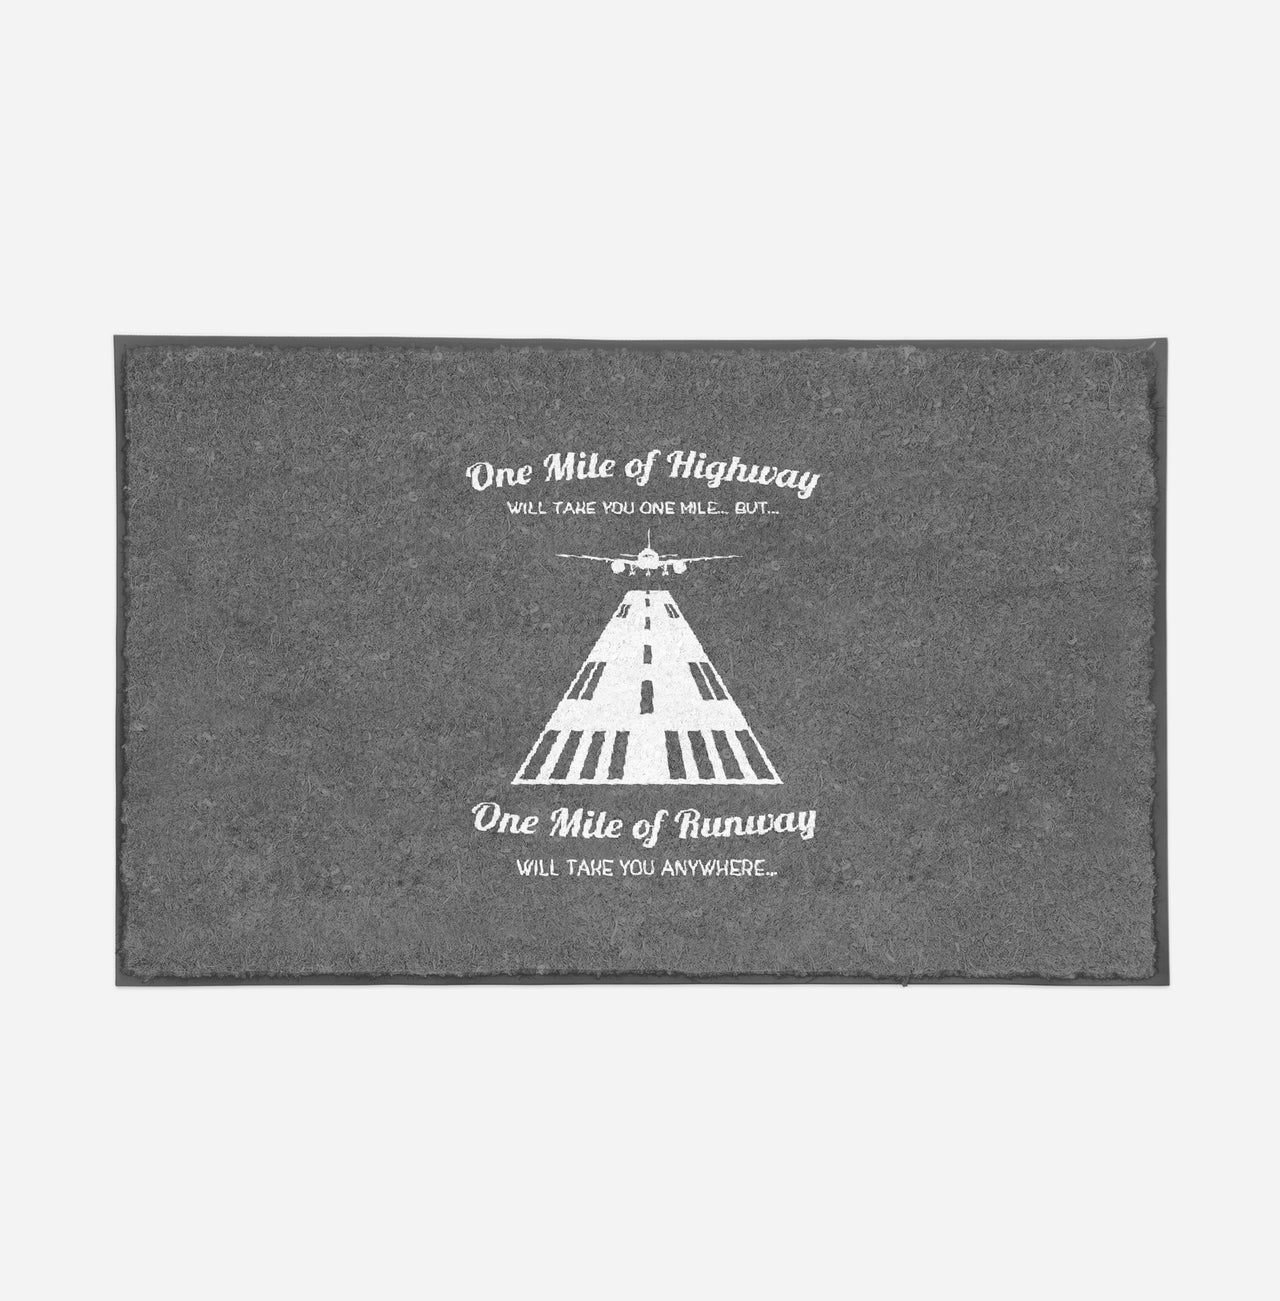 One Mile of Runway Will Take you Anywhere Designed Door Mats